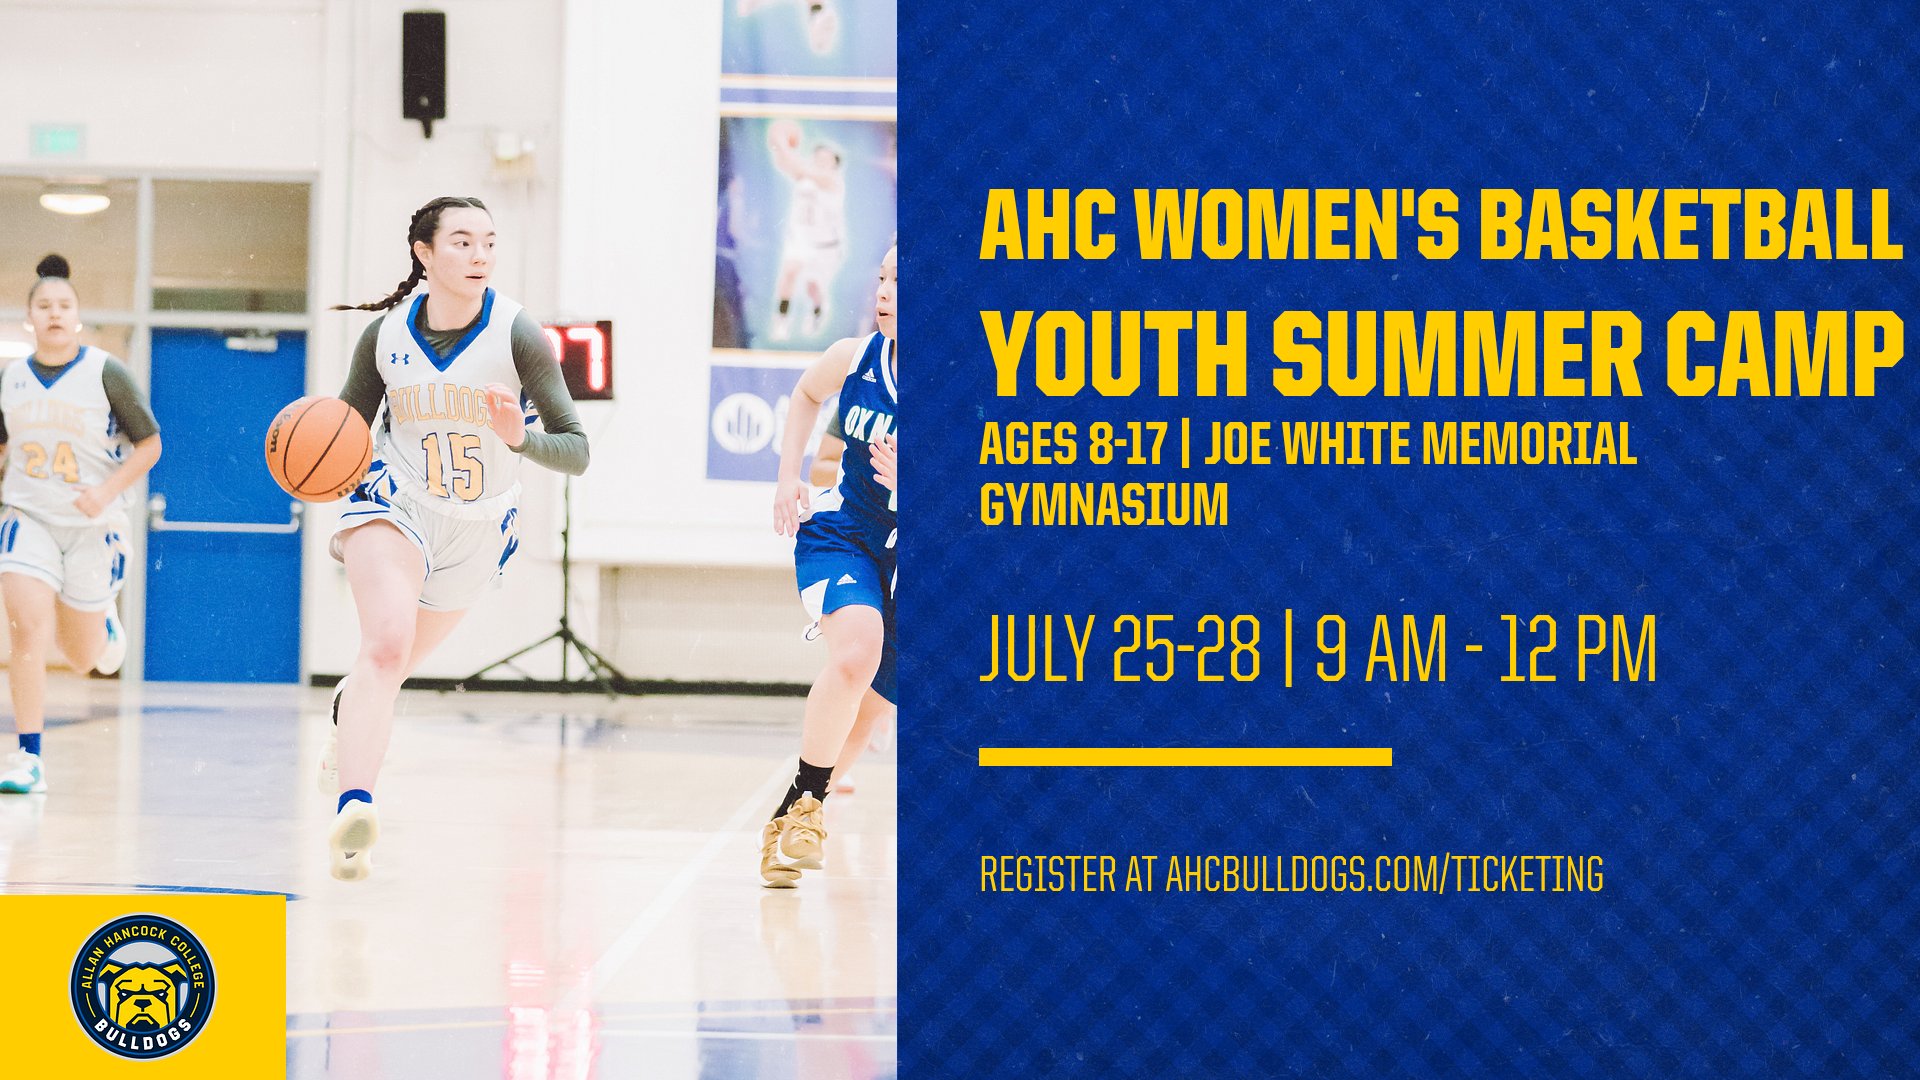 Women's Basketball Announces Girl's Youth Summer Camp Dates